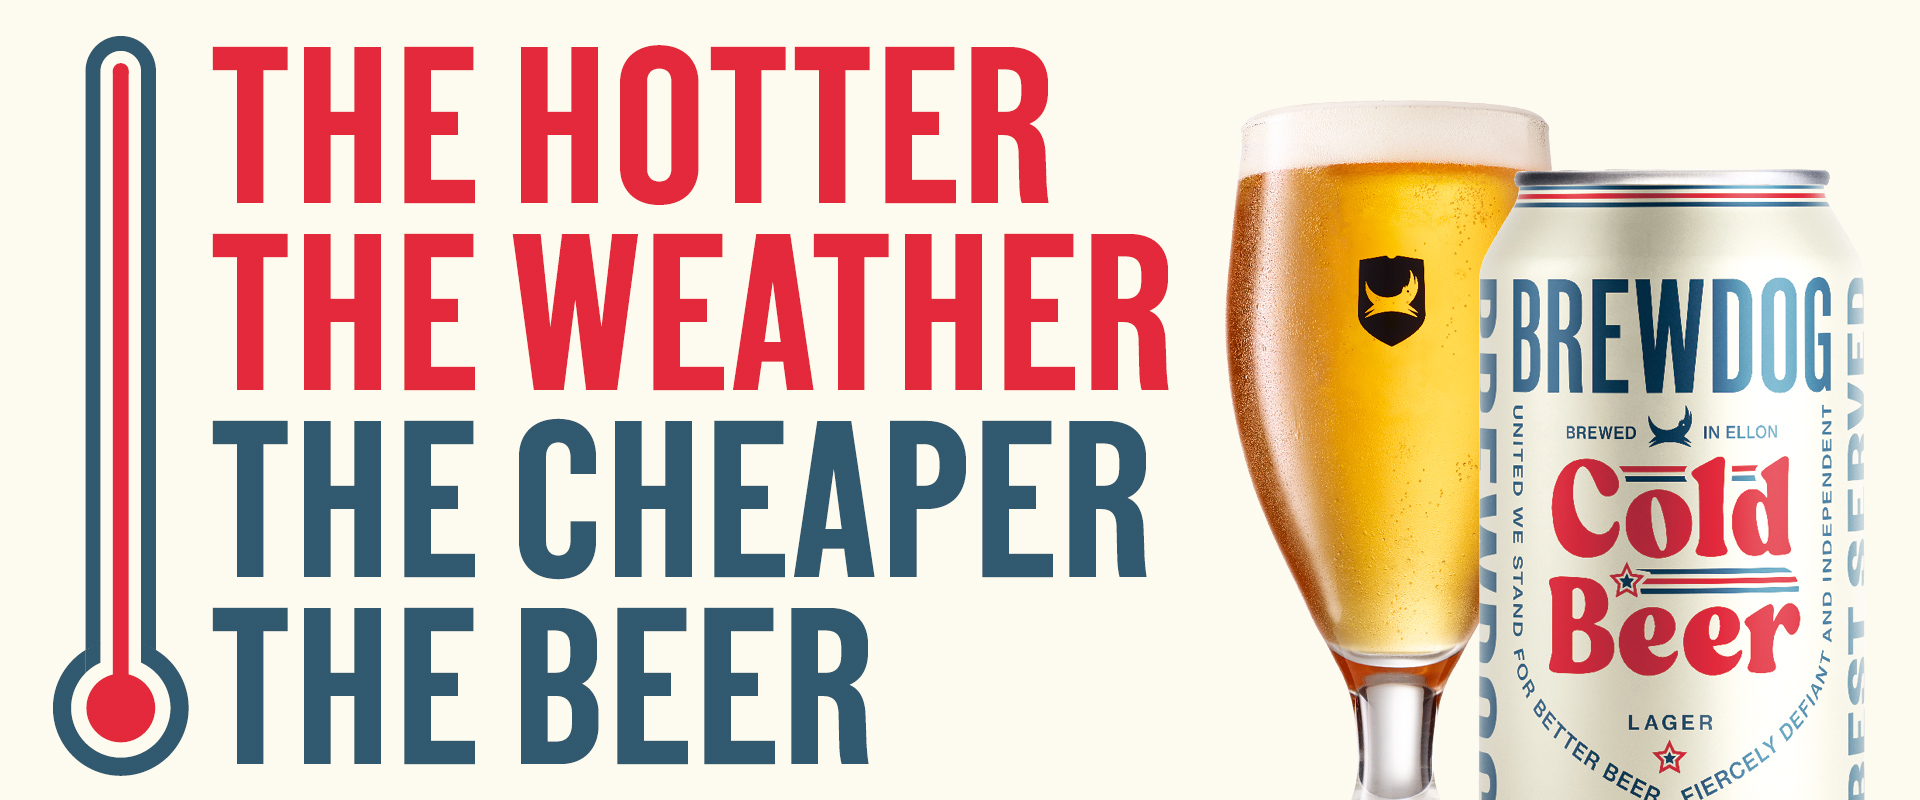 Cold Beerometer, The Hotter the Weather, the Cheaper the Beer